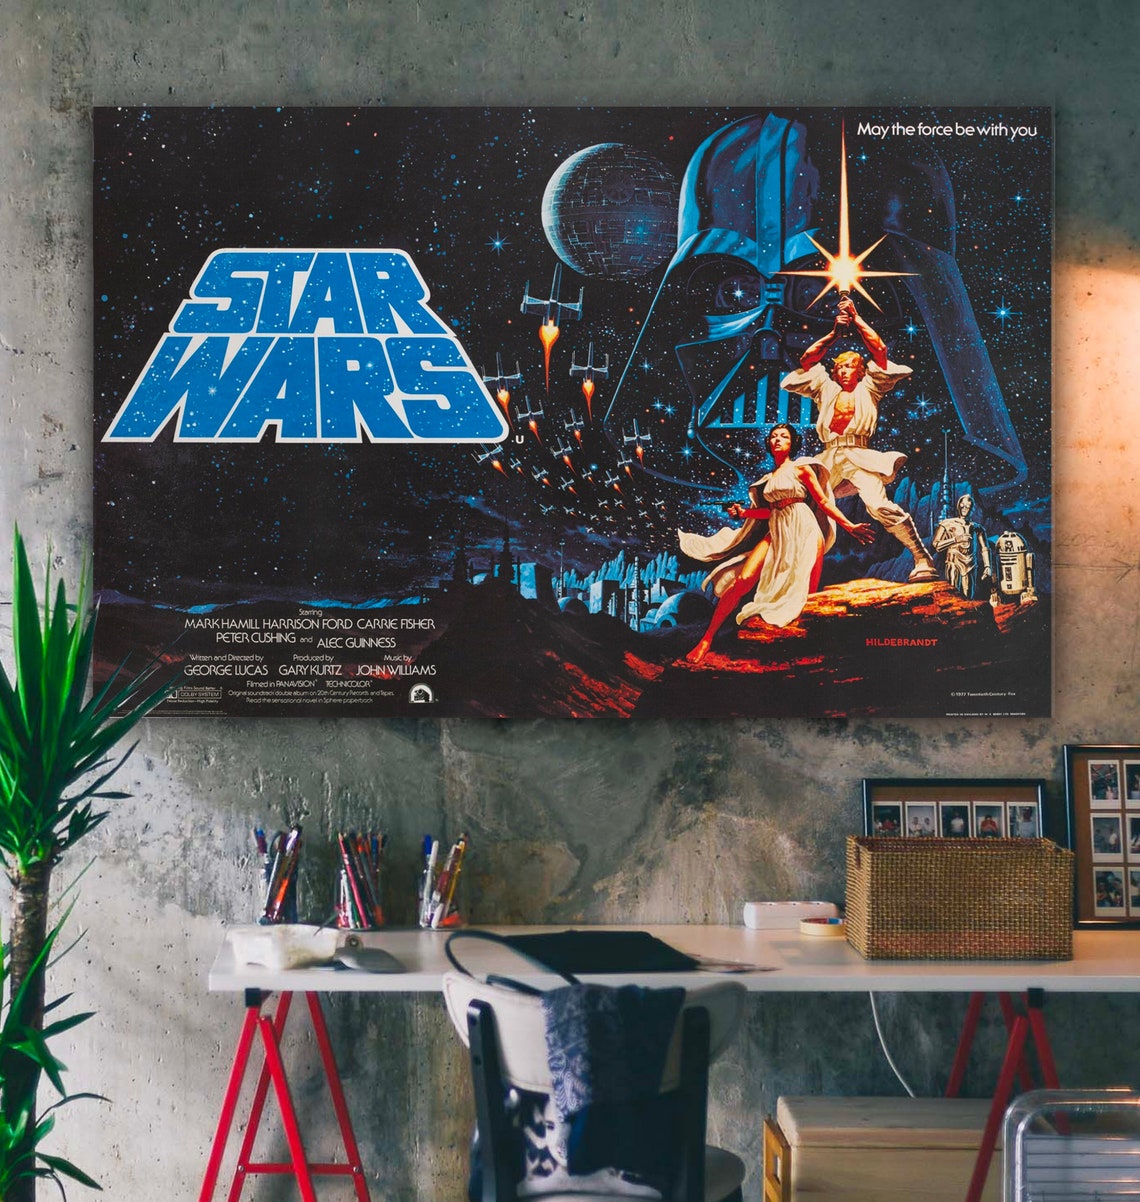 Star Wars 1977 Canvas Poster, Star Wars Vintage Poster, Star Wars A New Hope Poster, Star Wars Poster gift with  inches